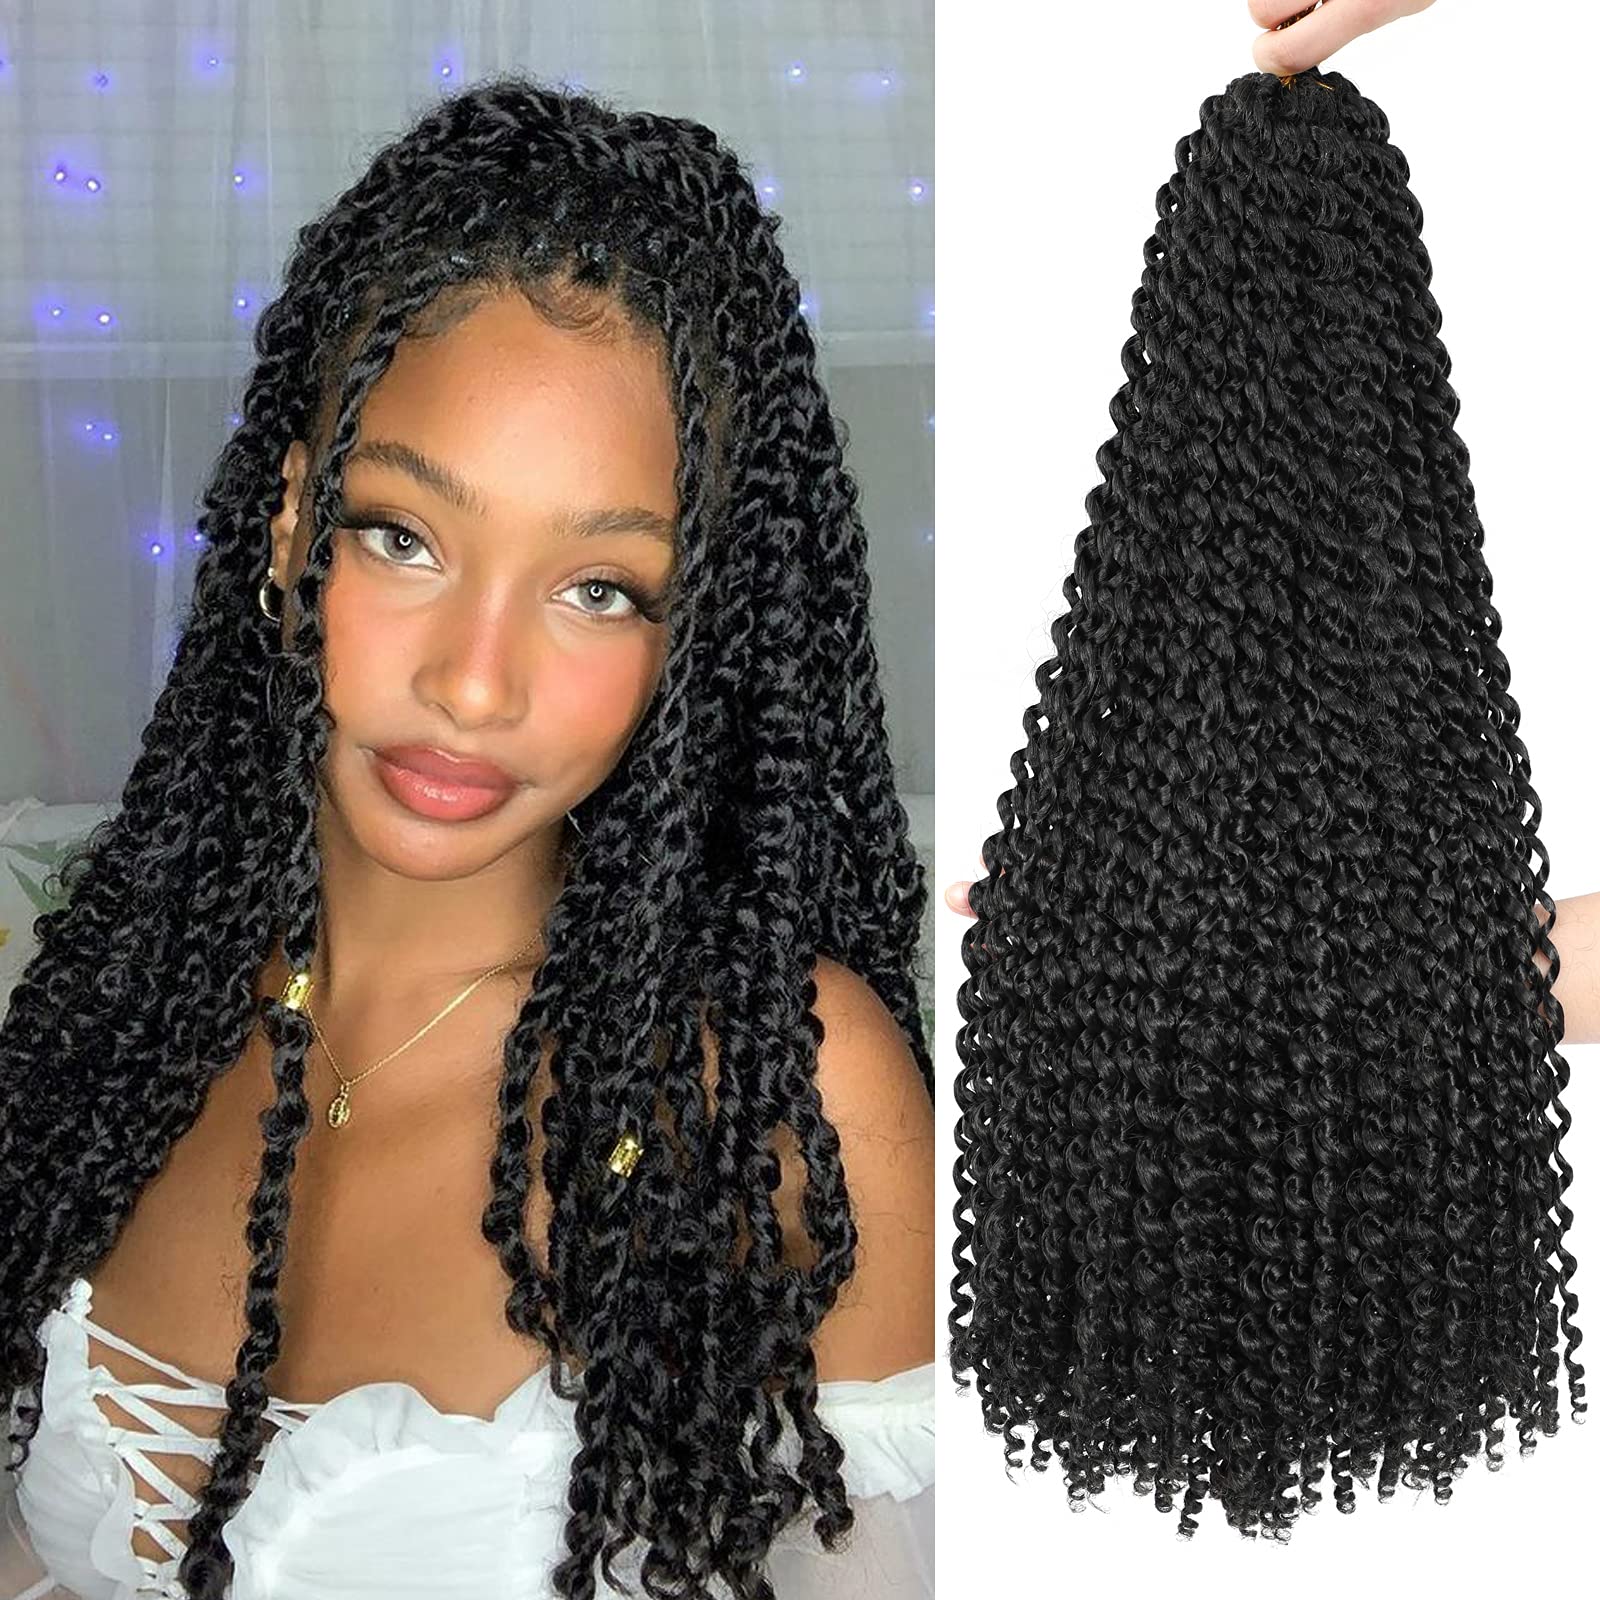 10 LONG Crochet Braids and Twists (20 inches and above)